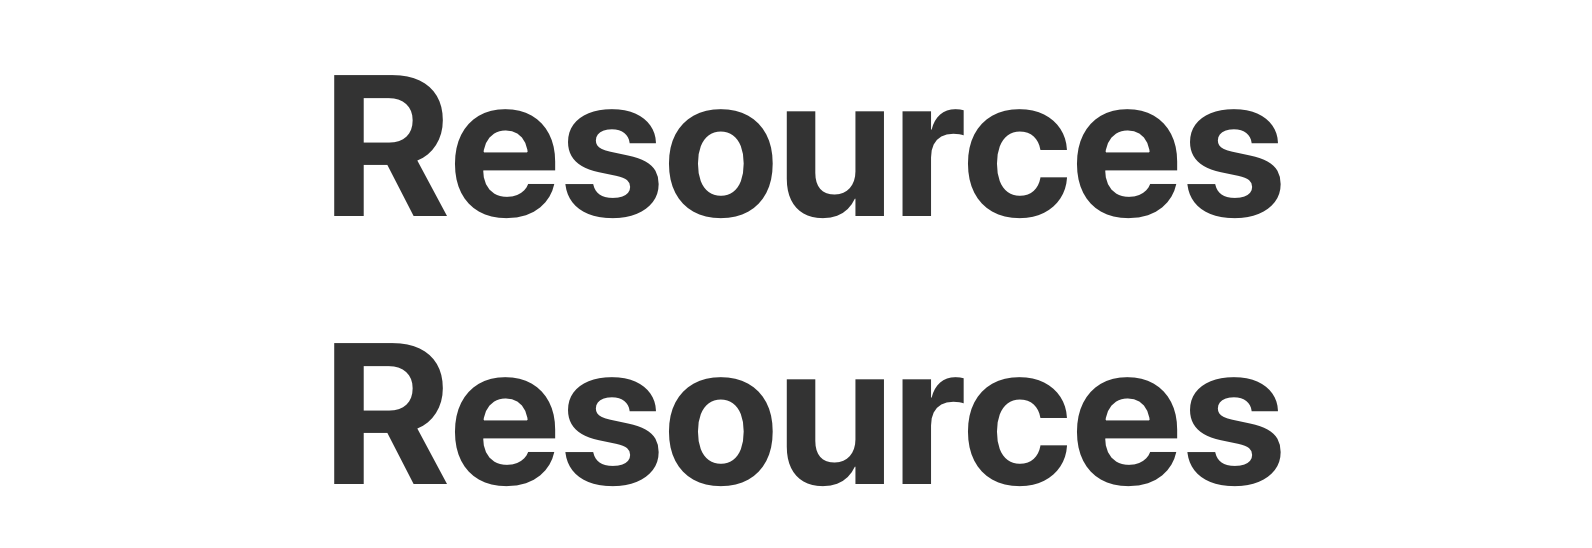 Resources is duplicated, large and in black